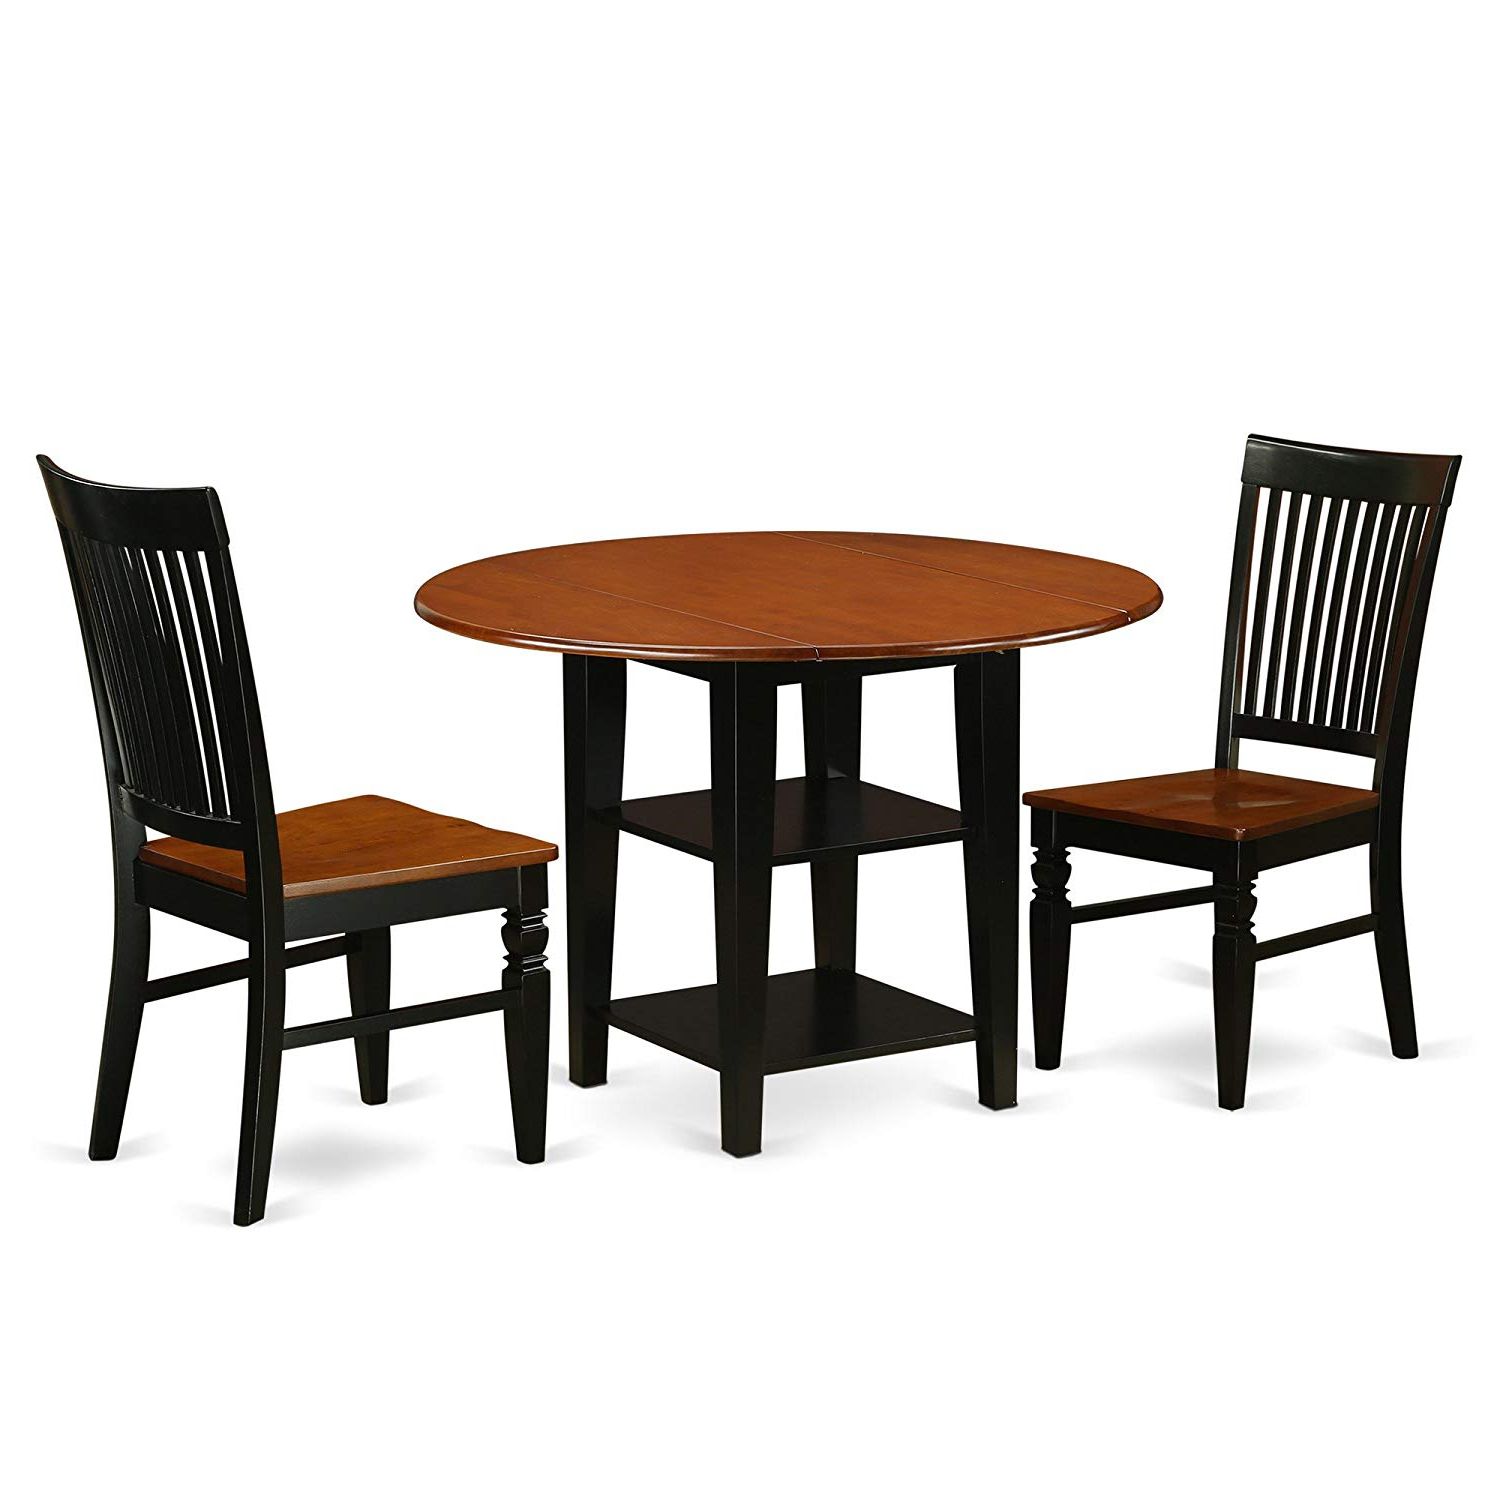 Medium Elegant Dining Tables Within 2020 East West Furniture Suwe3 Bch W Dining Set Medium Black & Cherry (View 10 of 25)